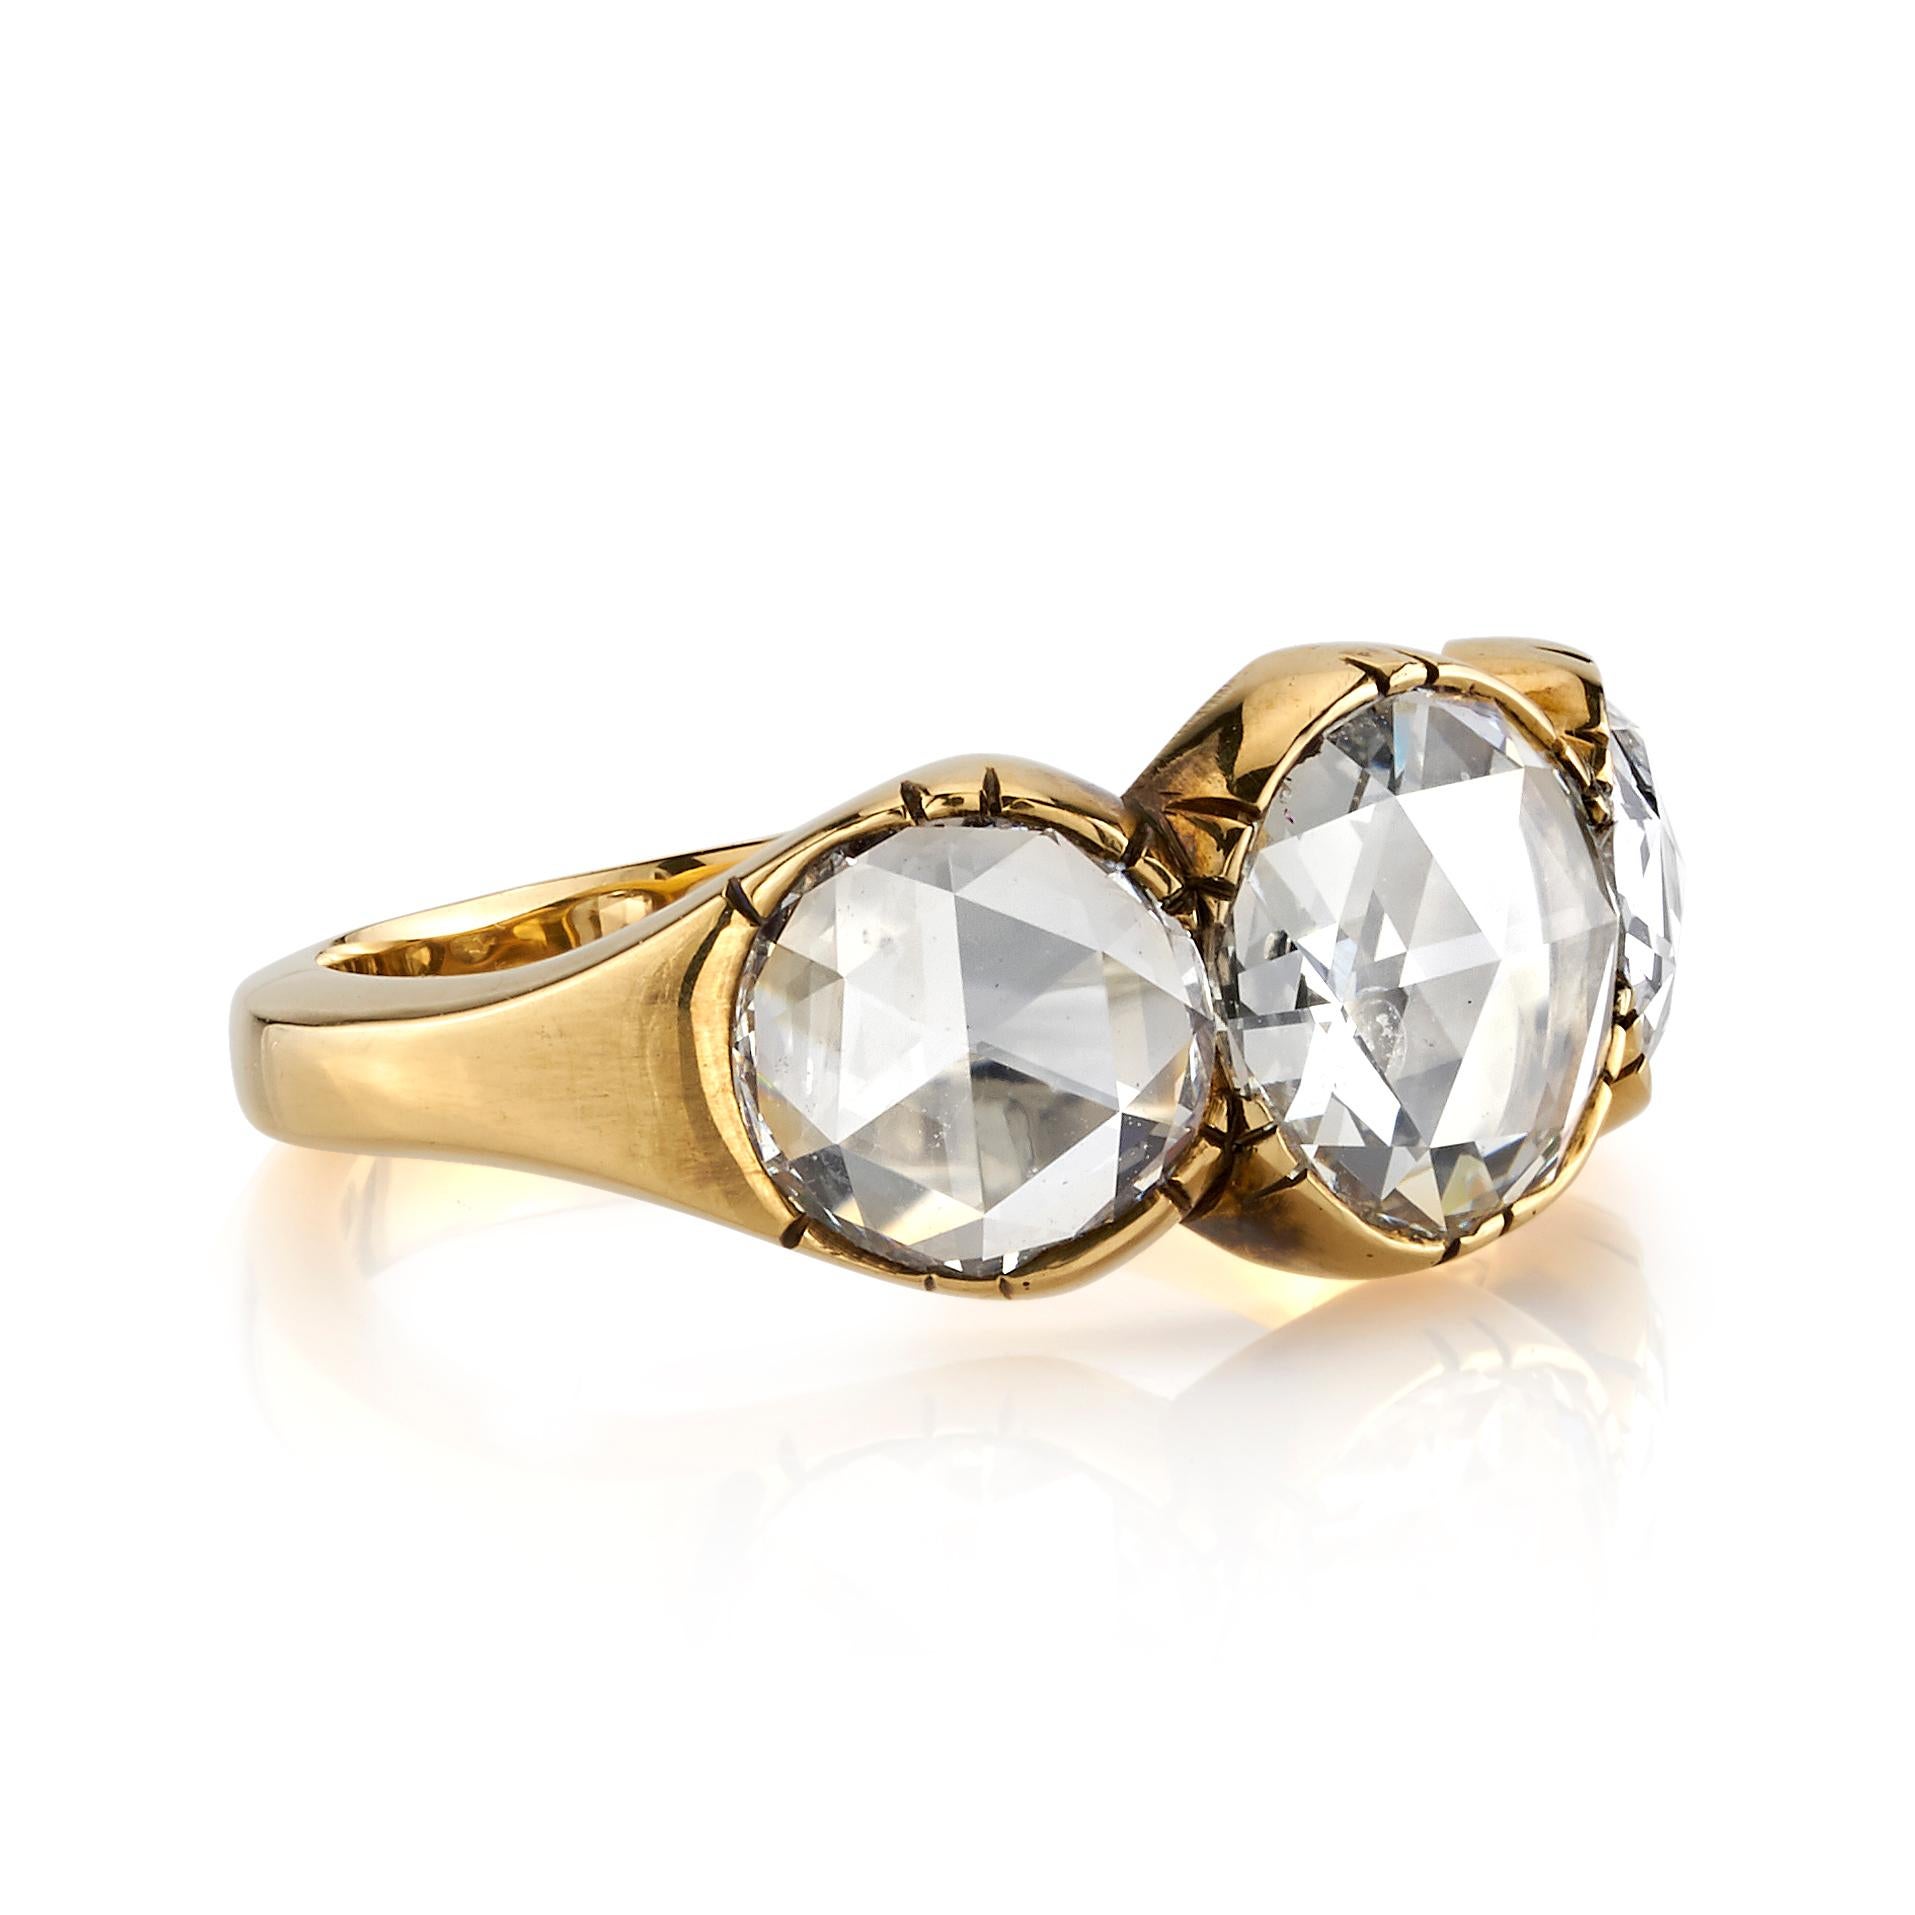 2.55ctw FGK/VVS1-VS2 GIA certified Rose cut diamonds set in a handcrafted 18K oxidized yellow gold three stone mounting. Ring is currently a size 6 and can be sized to fit. 